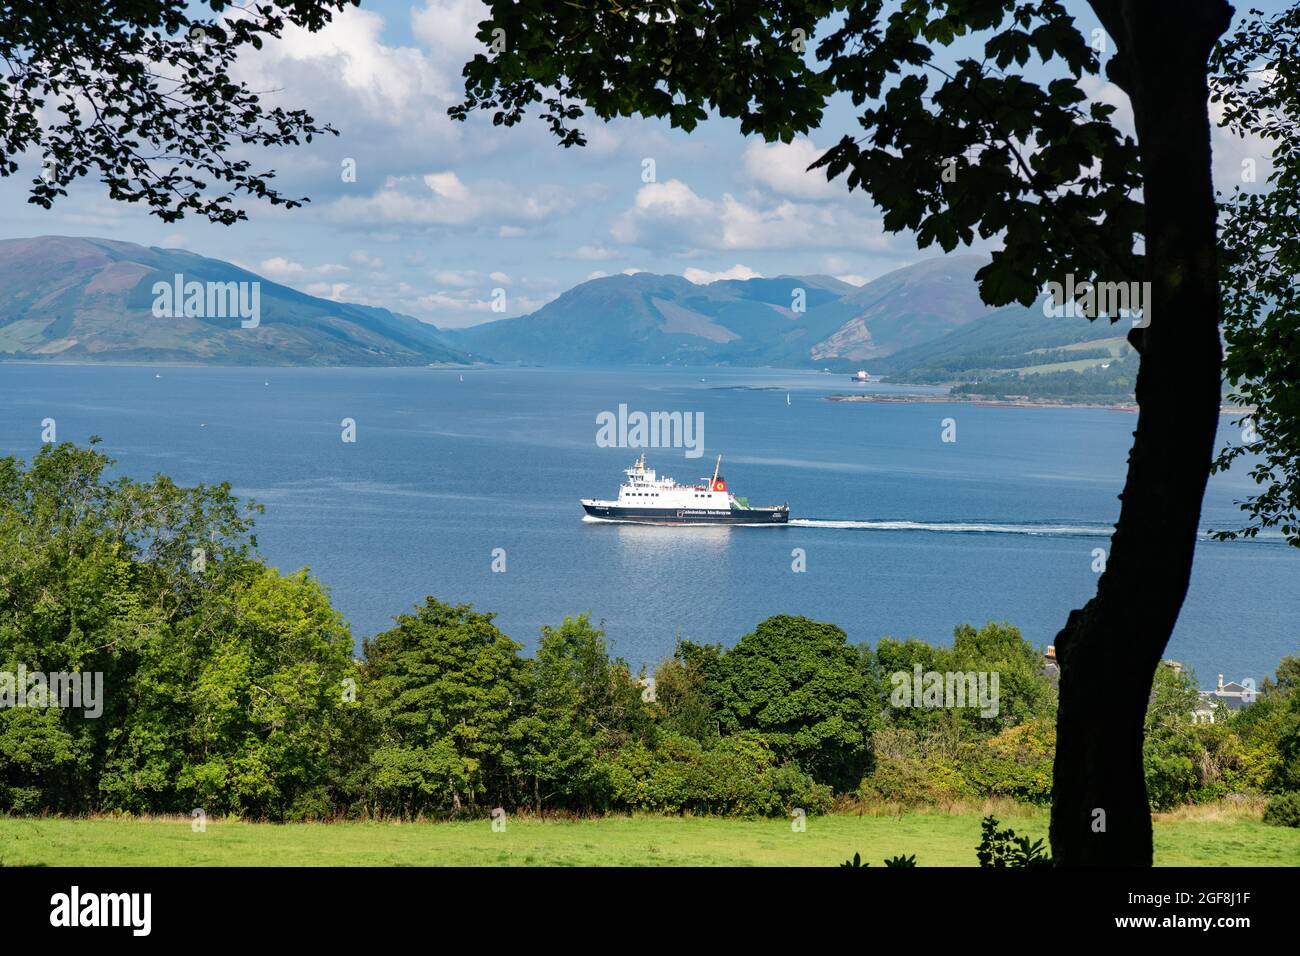 Rothesay, Isle of Bute, Scotland, UK. 24th Aug, 2021. UK weather - once the morning fog which led to the cancellation of early ferries from Weymss Bay, the Isle of Bute looked as pretty as a postcard with blue skies and glorious sunshine. Pictured MV Argyle sailing into Rothesay Credit: Kay Roxby/Alamy Live News Stock Photo